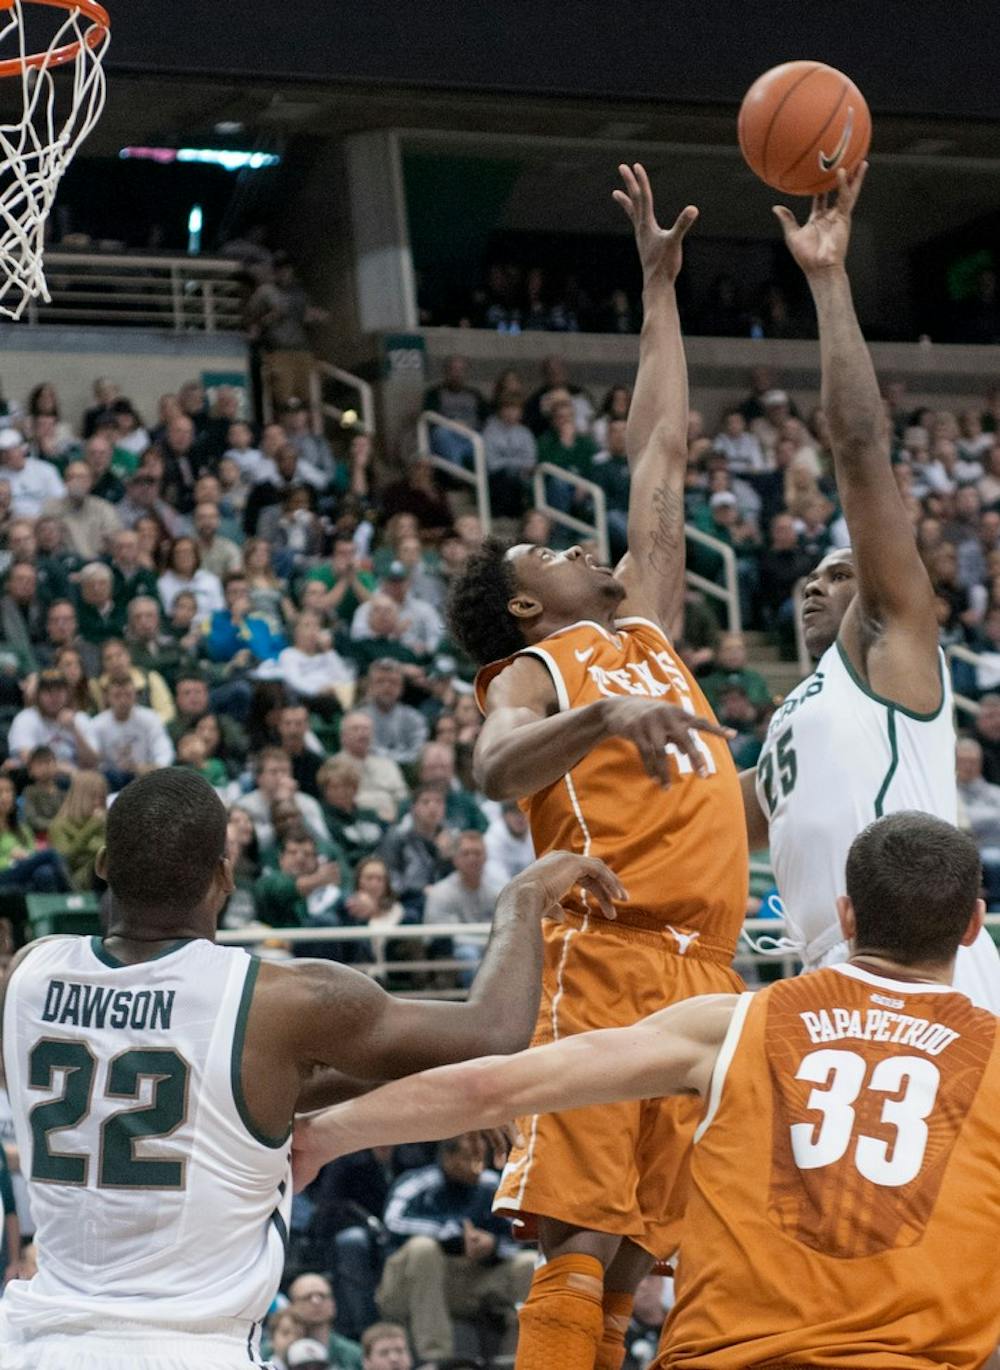 	<p>Senior center Derrick Nix goes to shoot the ball during the game against Texas on Dec. 22, 2012, at Breslin Center. Nix had a career high 25 points and 11 rebounds in the game, helping the Spartans beat the Longhorns 67-56. Natalie Kolb/The State News</p>